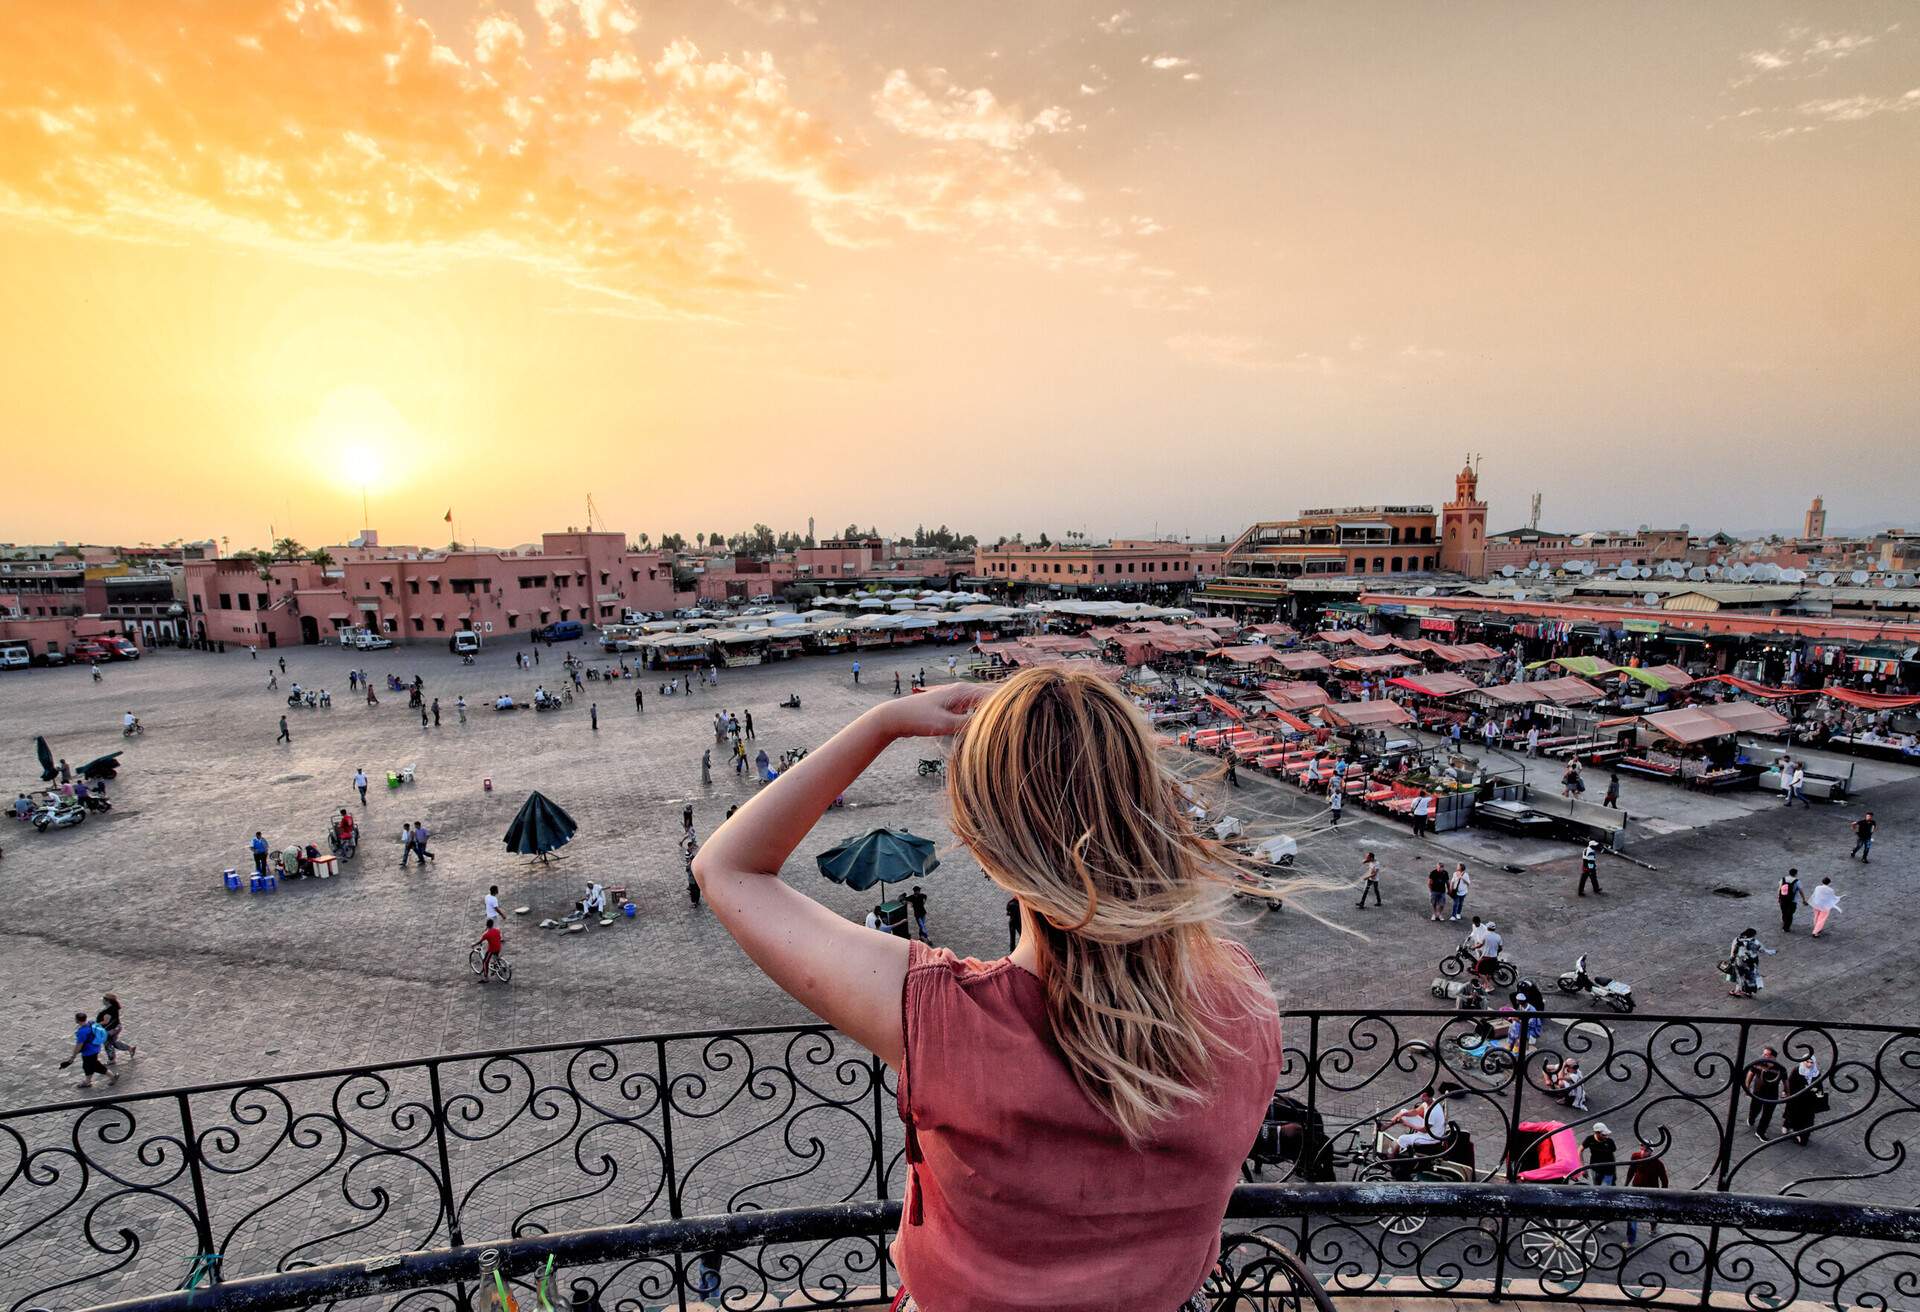 Jamaa el-Fna market Marrakech at sunset. Tourist watching the shops in the old medina